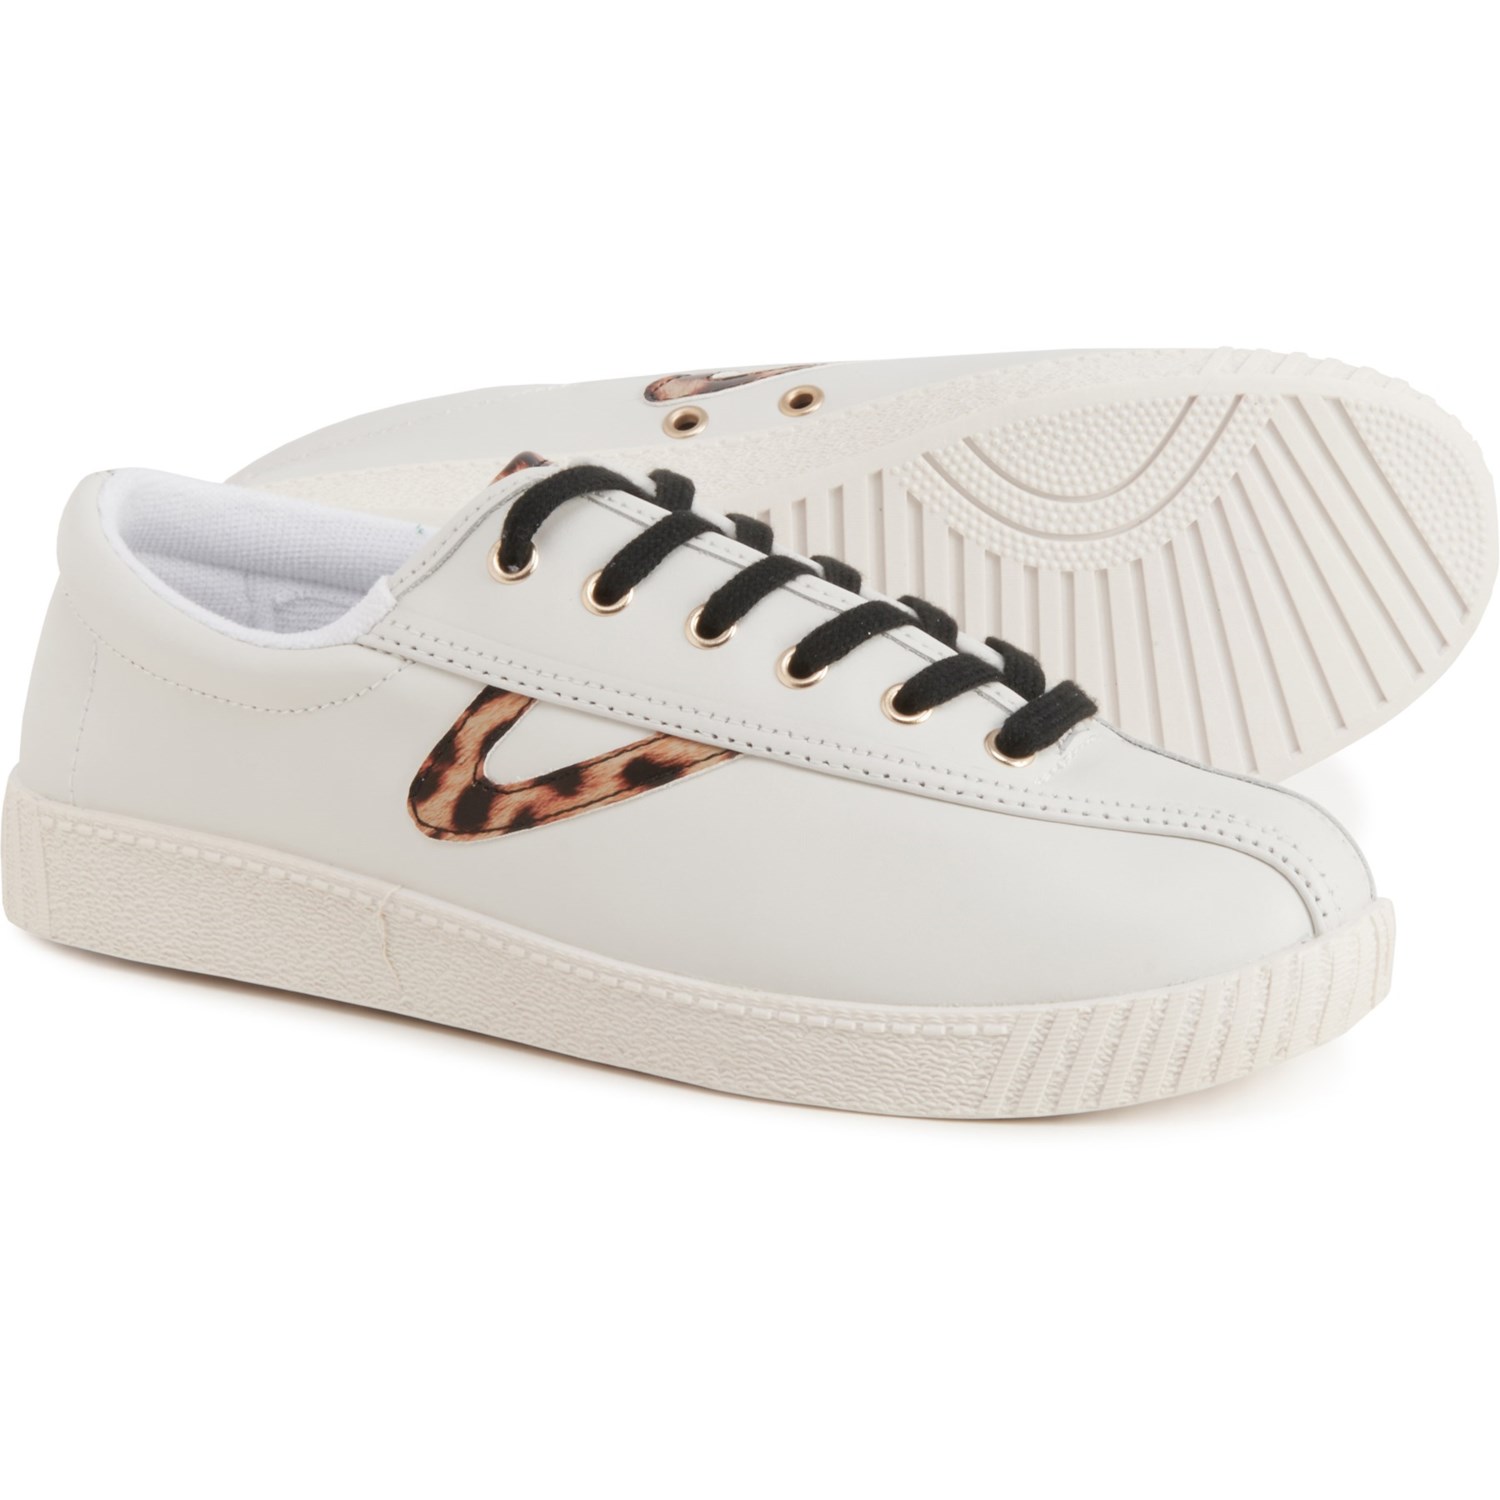 Tretorn Nylite Plus Sneakers - Leather (For Women)